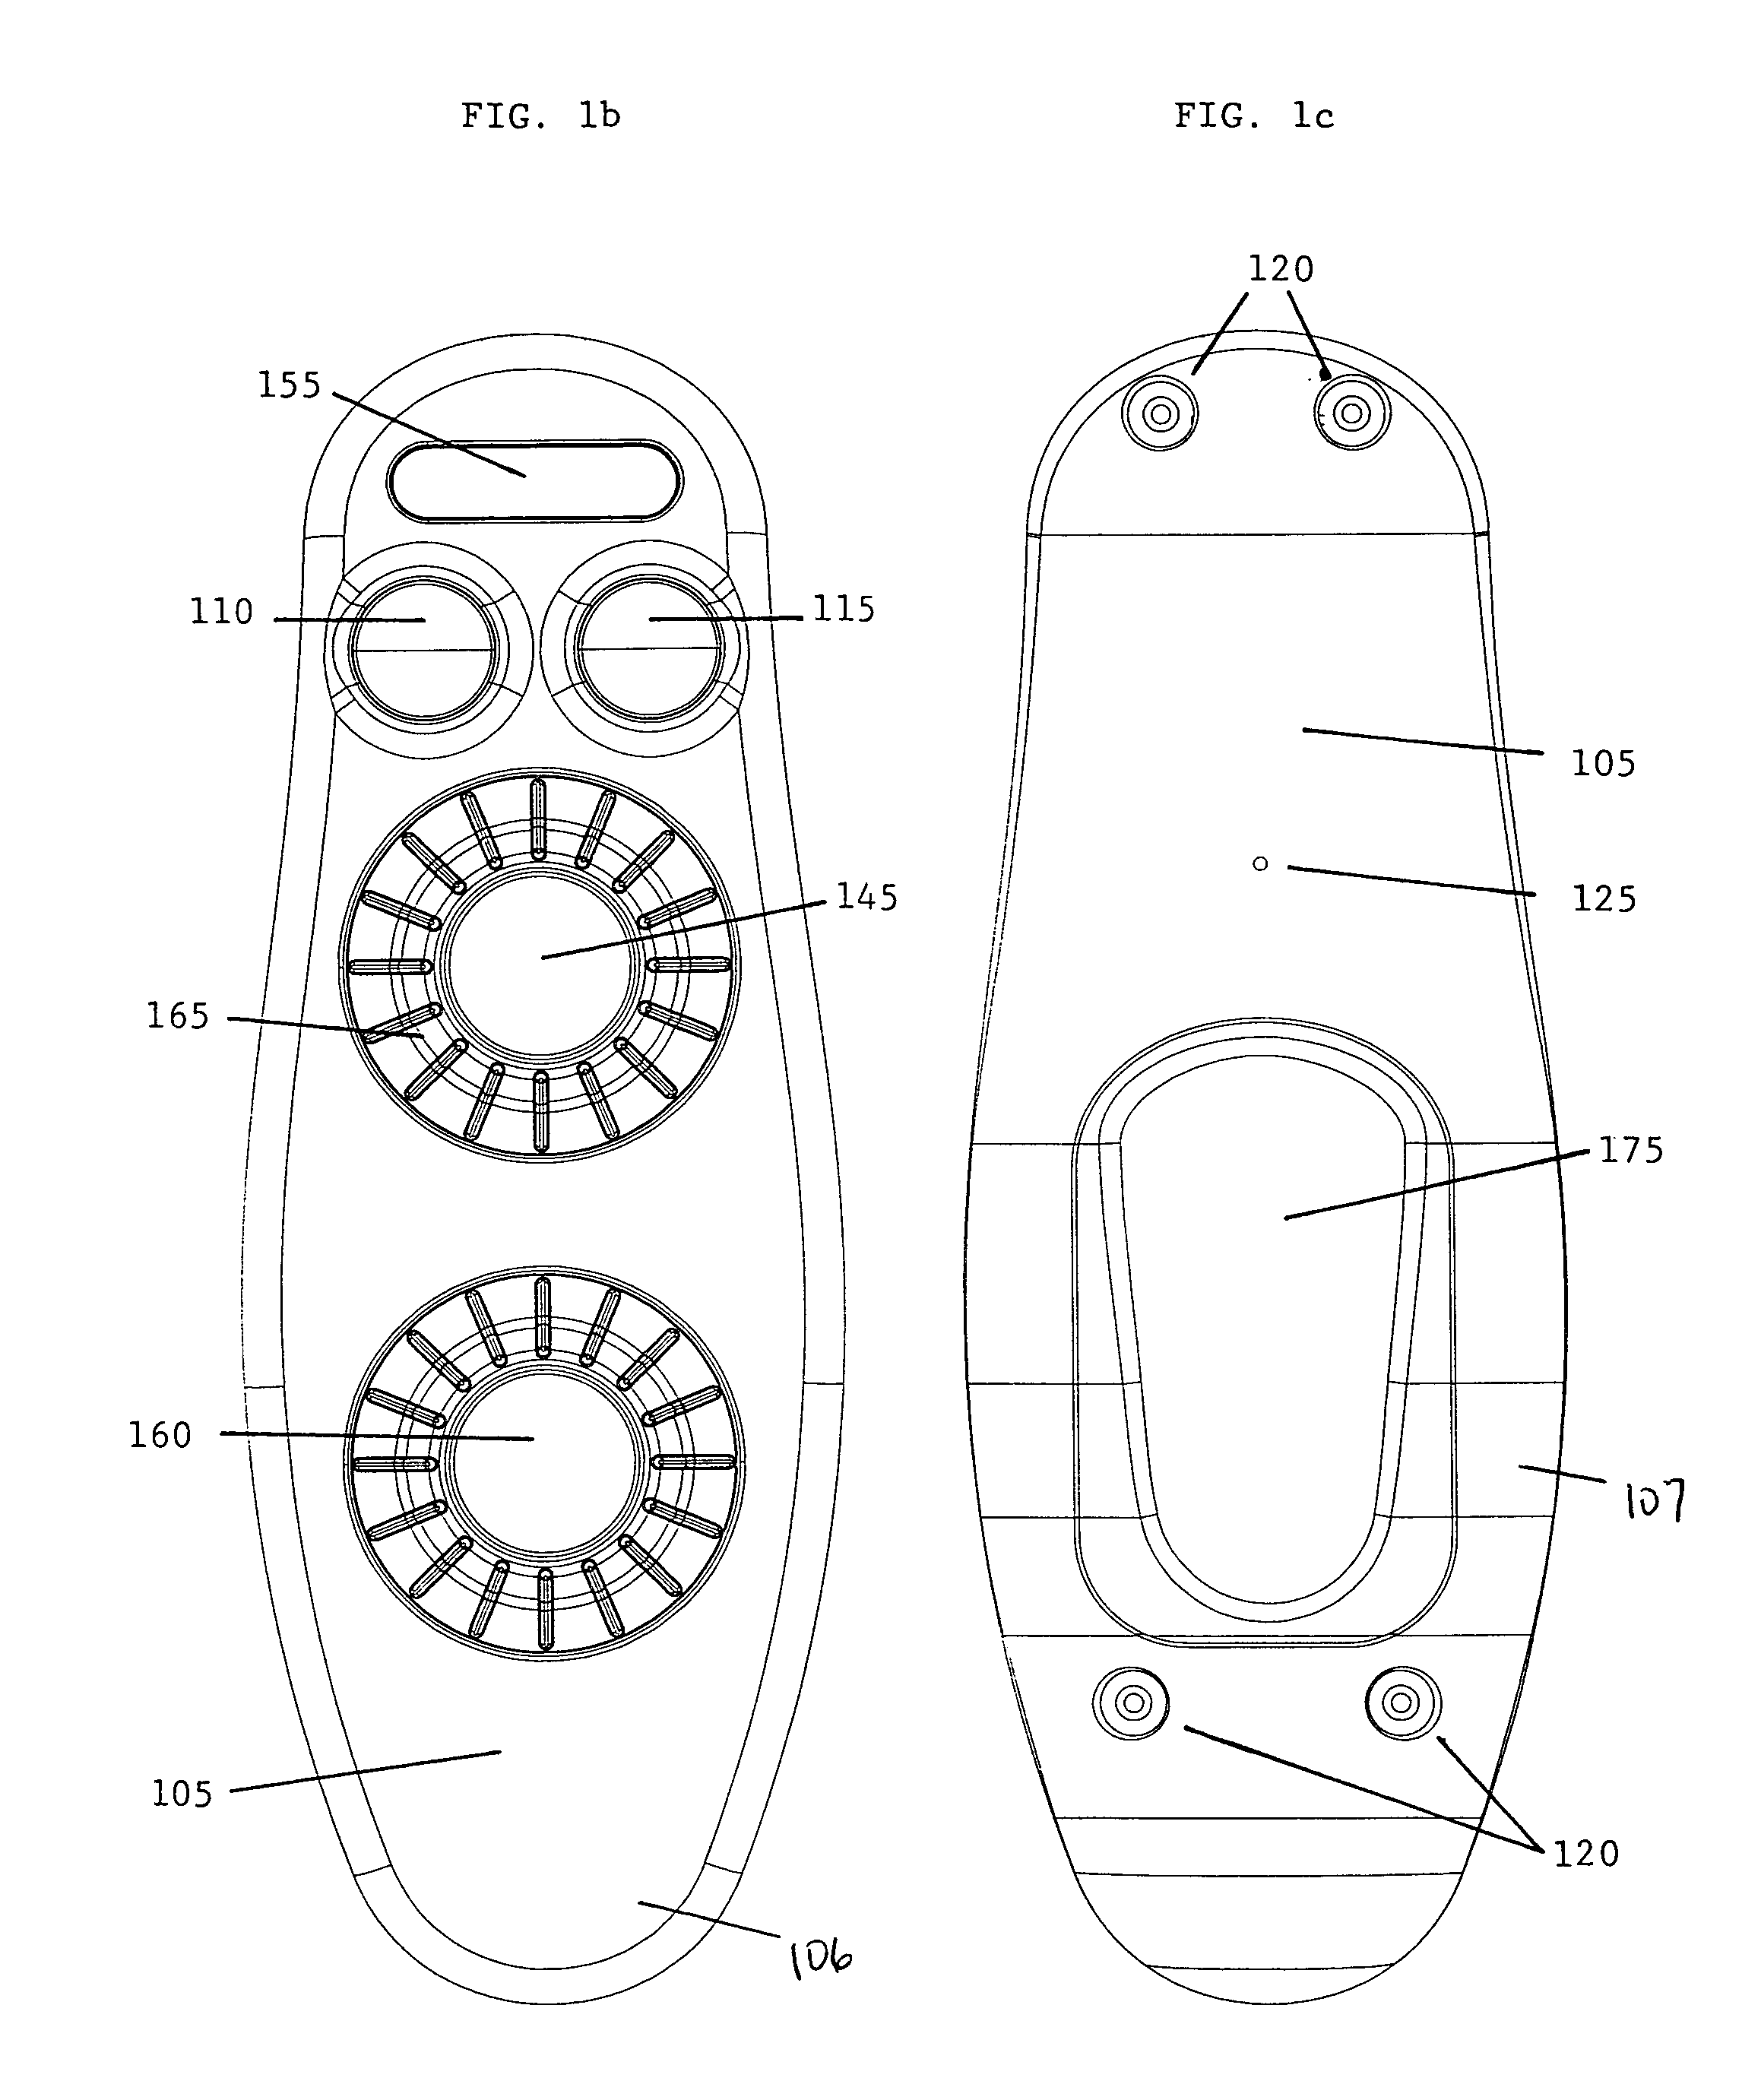 Apparatus and method for television remote control with simple features